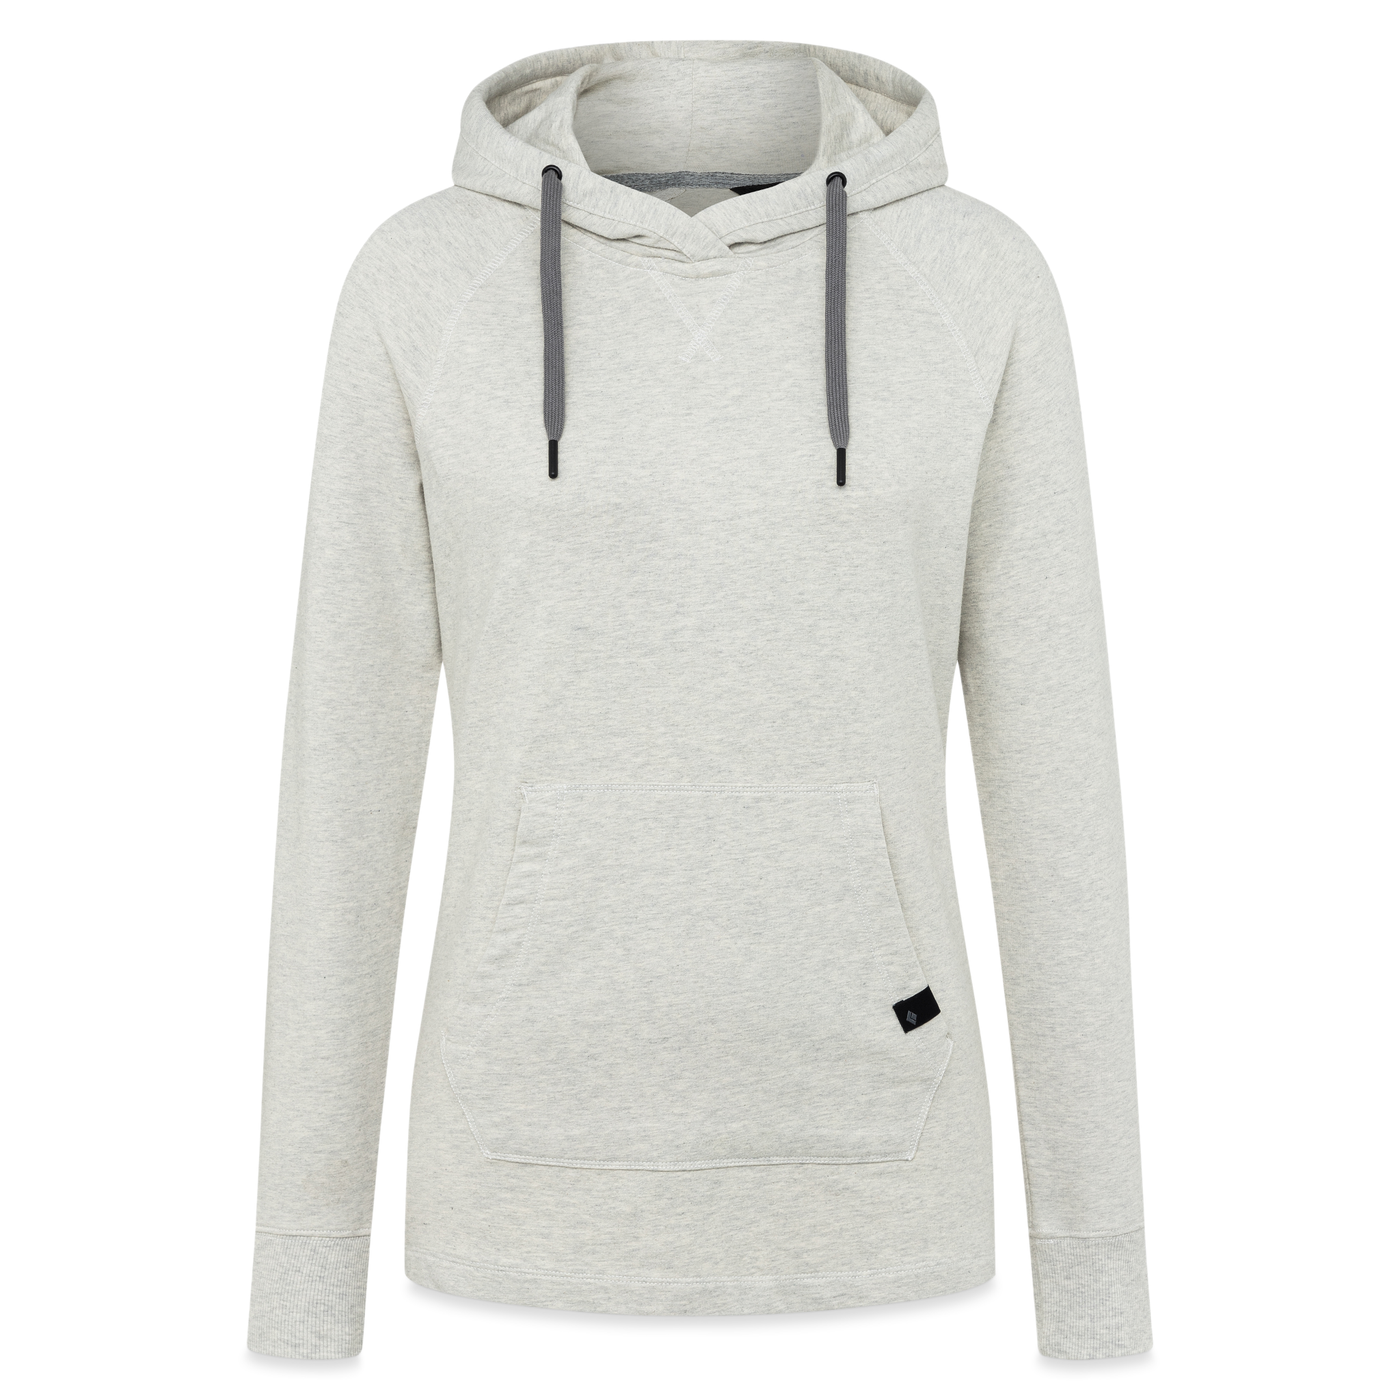 BD Rays Pullover Hoody - Women's